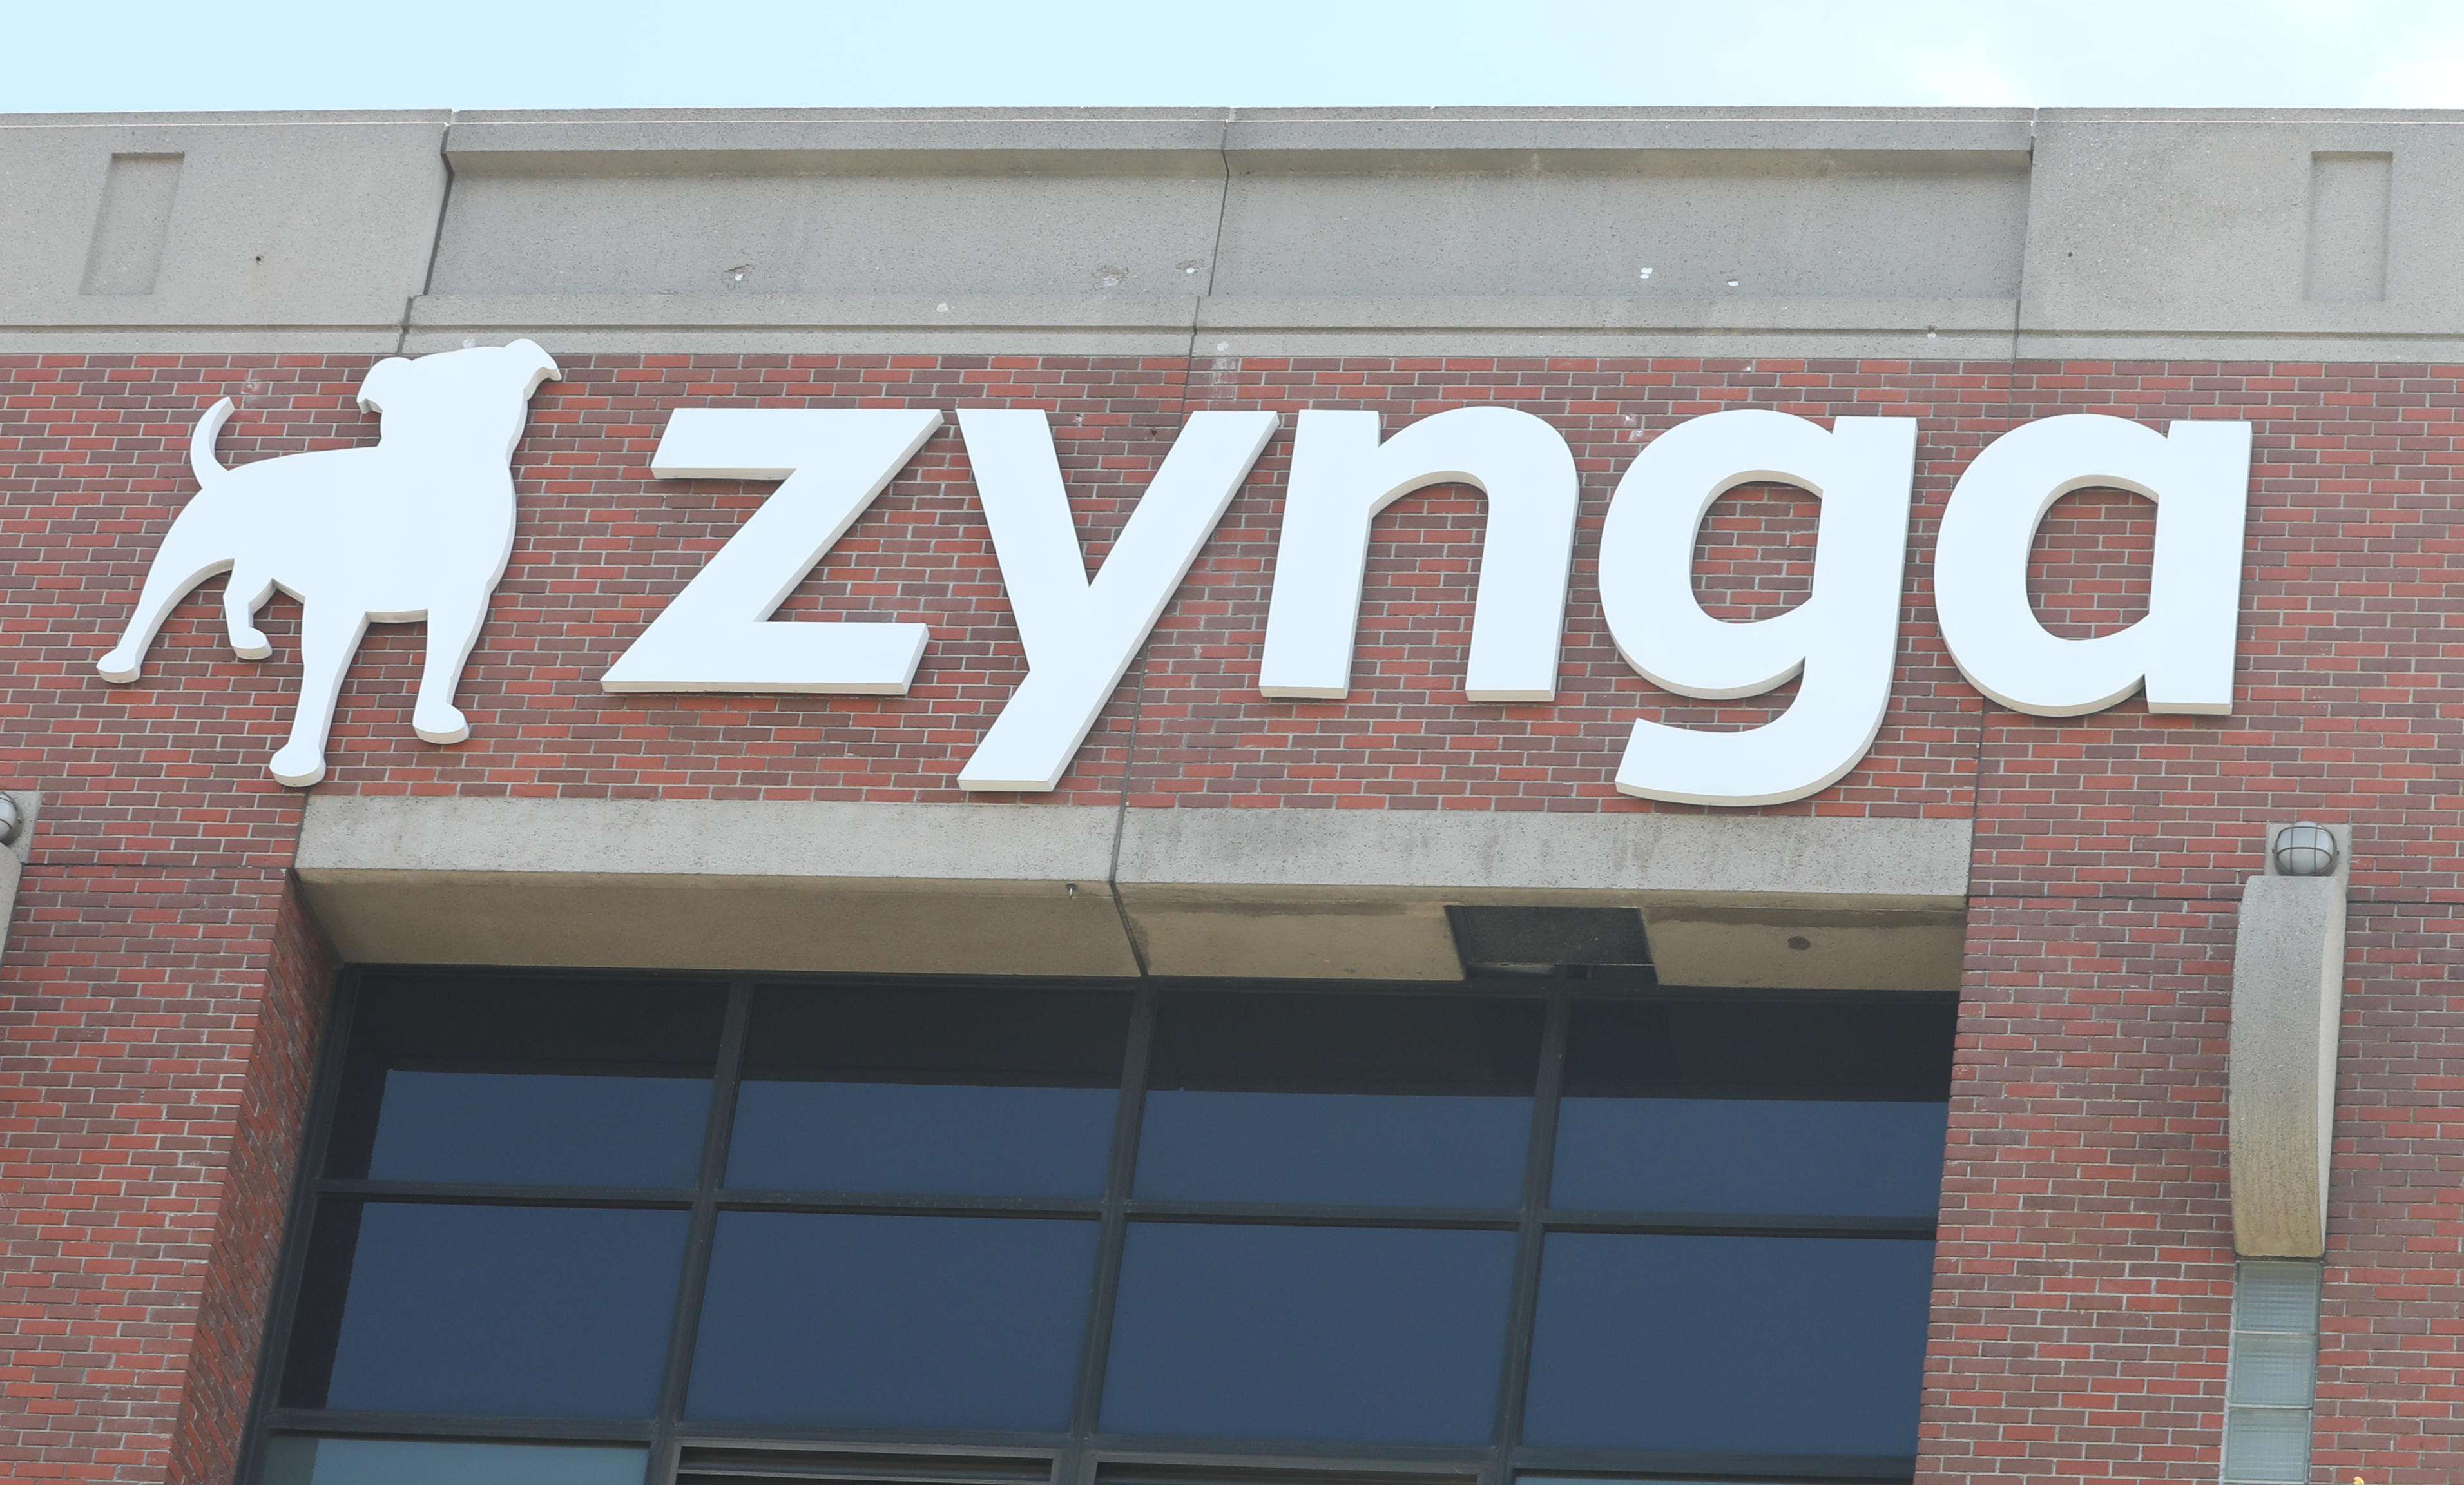 Zynga logo seen outside the top corner of the building on Tuesday, May 28, 2019 in San Francisco, Calif. Zynga is selling its headquarters building, but will lease it back and remained headquartered there